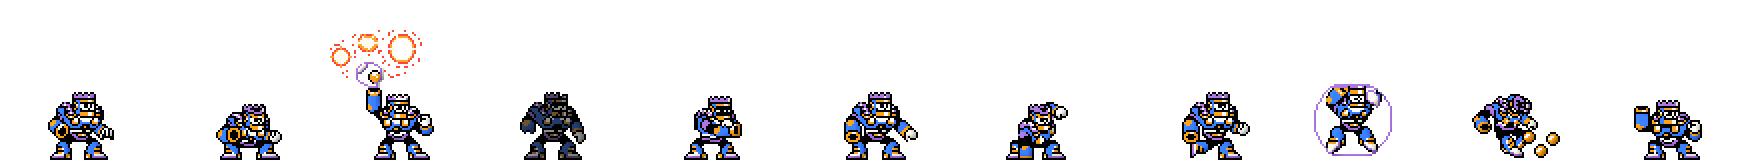 Burst Man | Base Sprite Right<div style="margin-top: 4px; letting-spacing: 1px; font-size: 90%; font-family: Courier New; color: rgb(159, 150, 172);">[robot:right:base]{burst-man}</div>